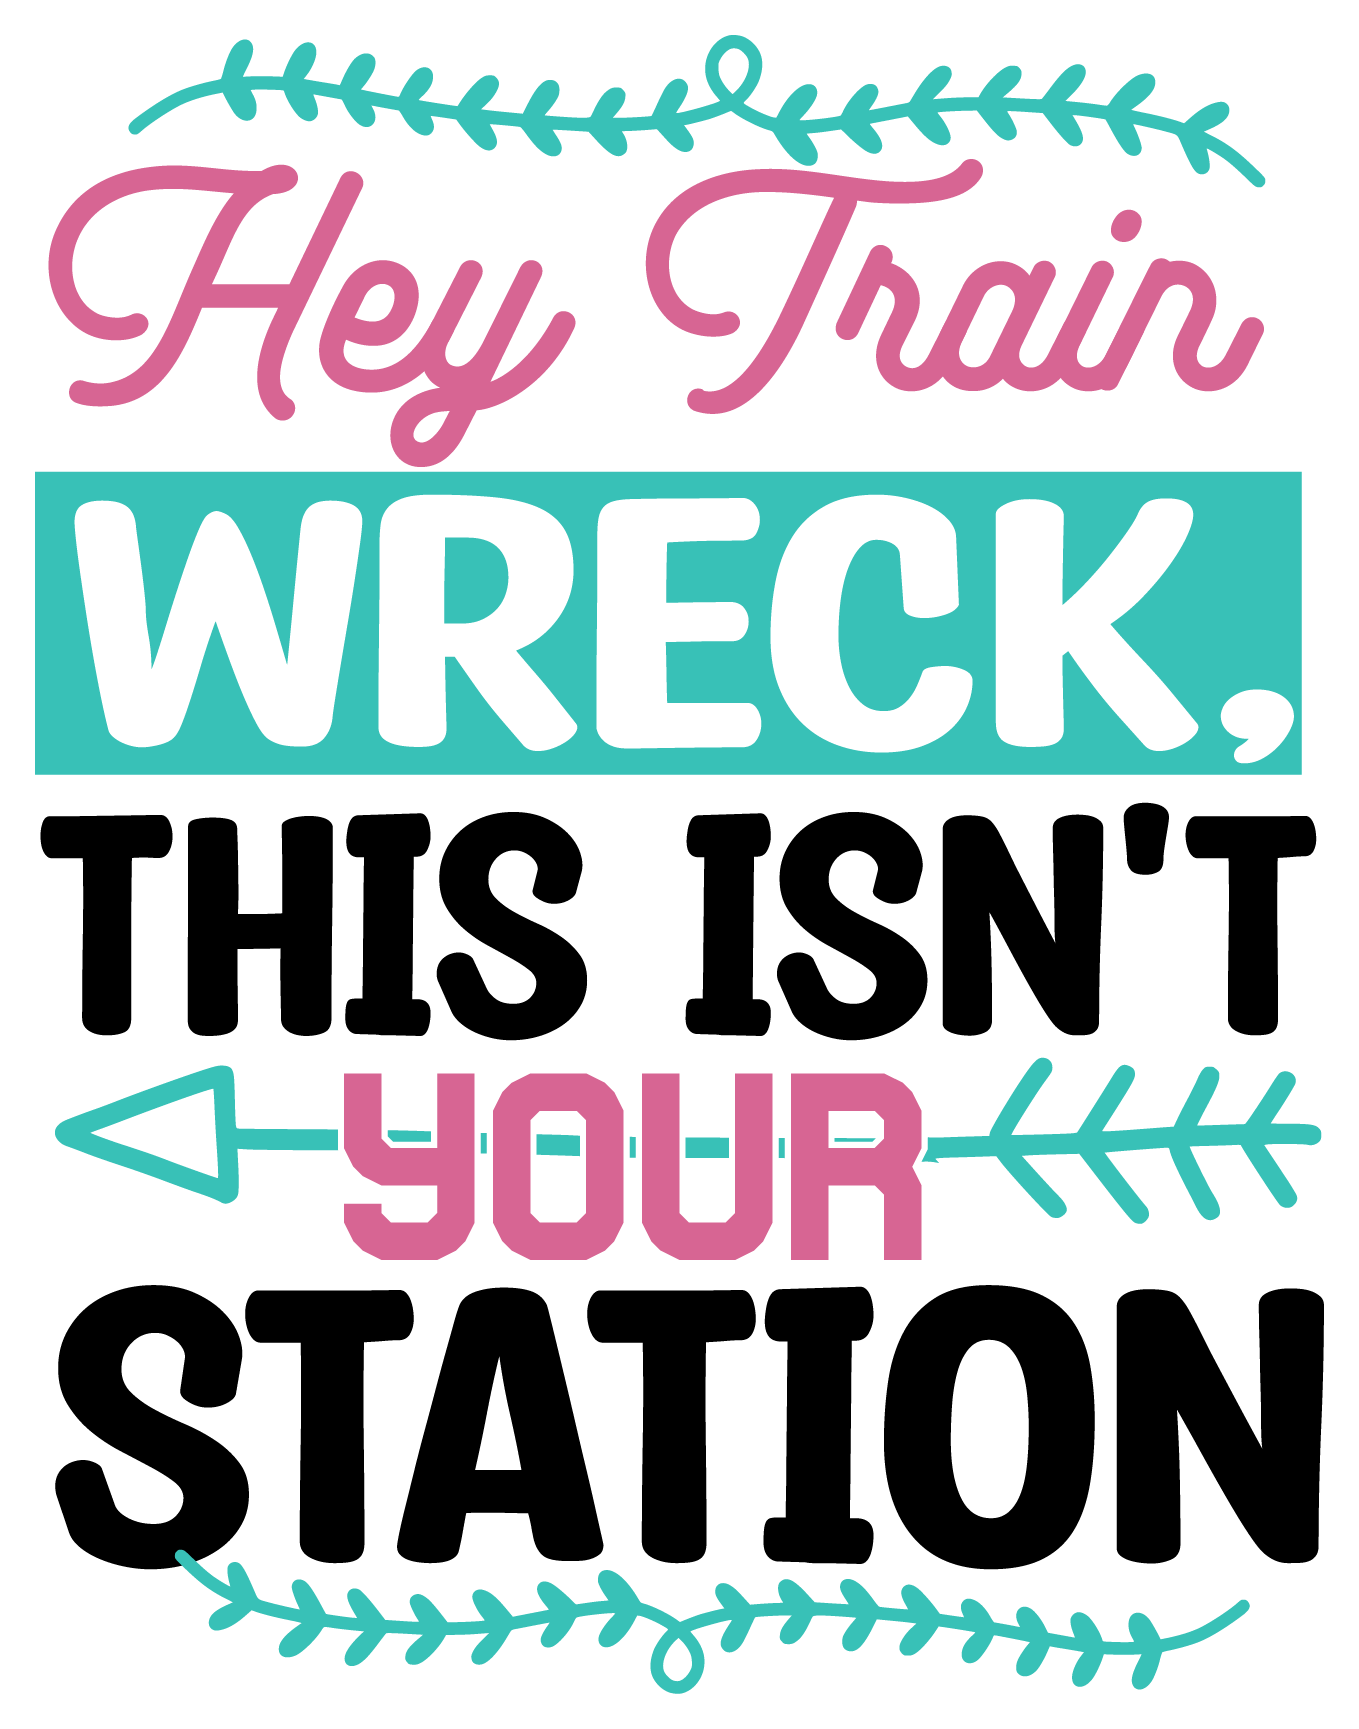 Stickers - Hey Train Wreck, This Isn't Your Station Sticker, Sarcastic Stickers